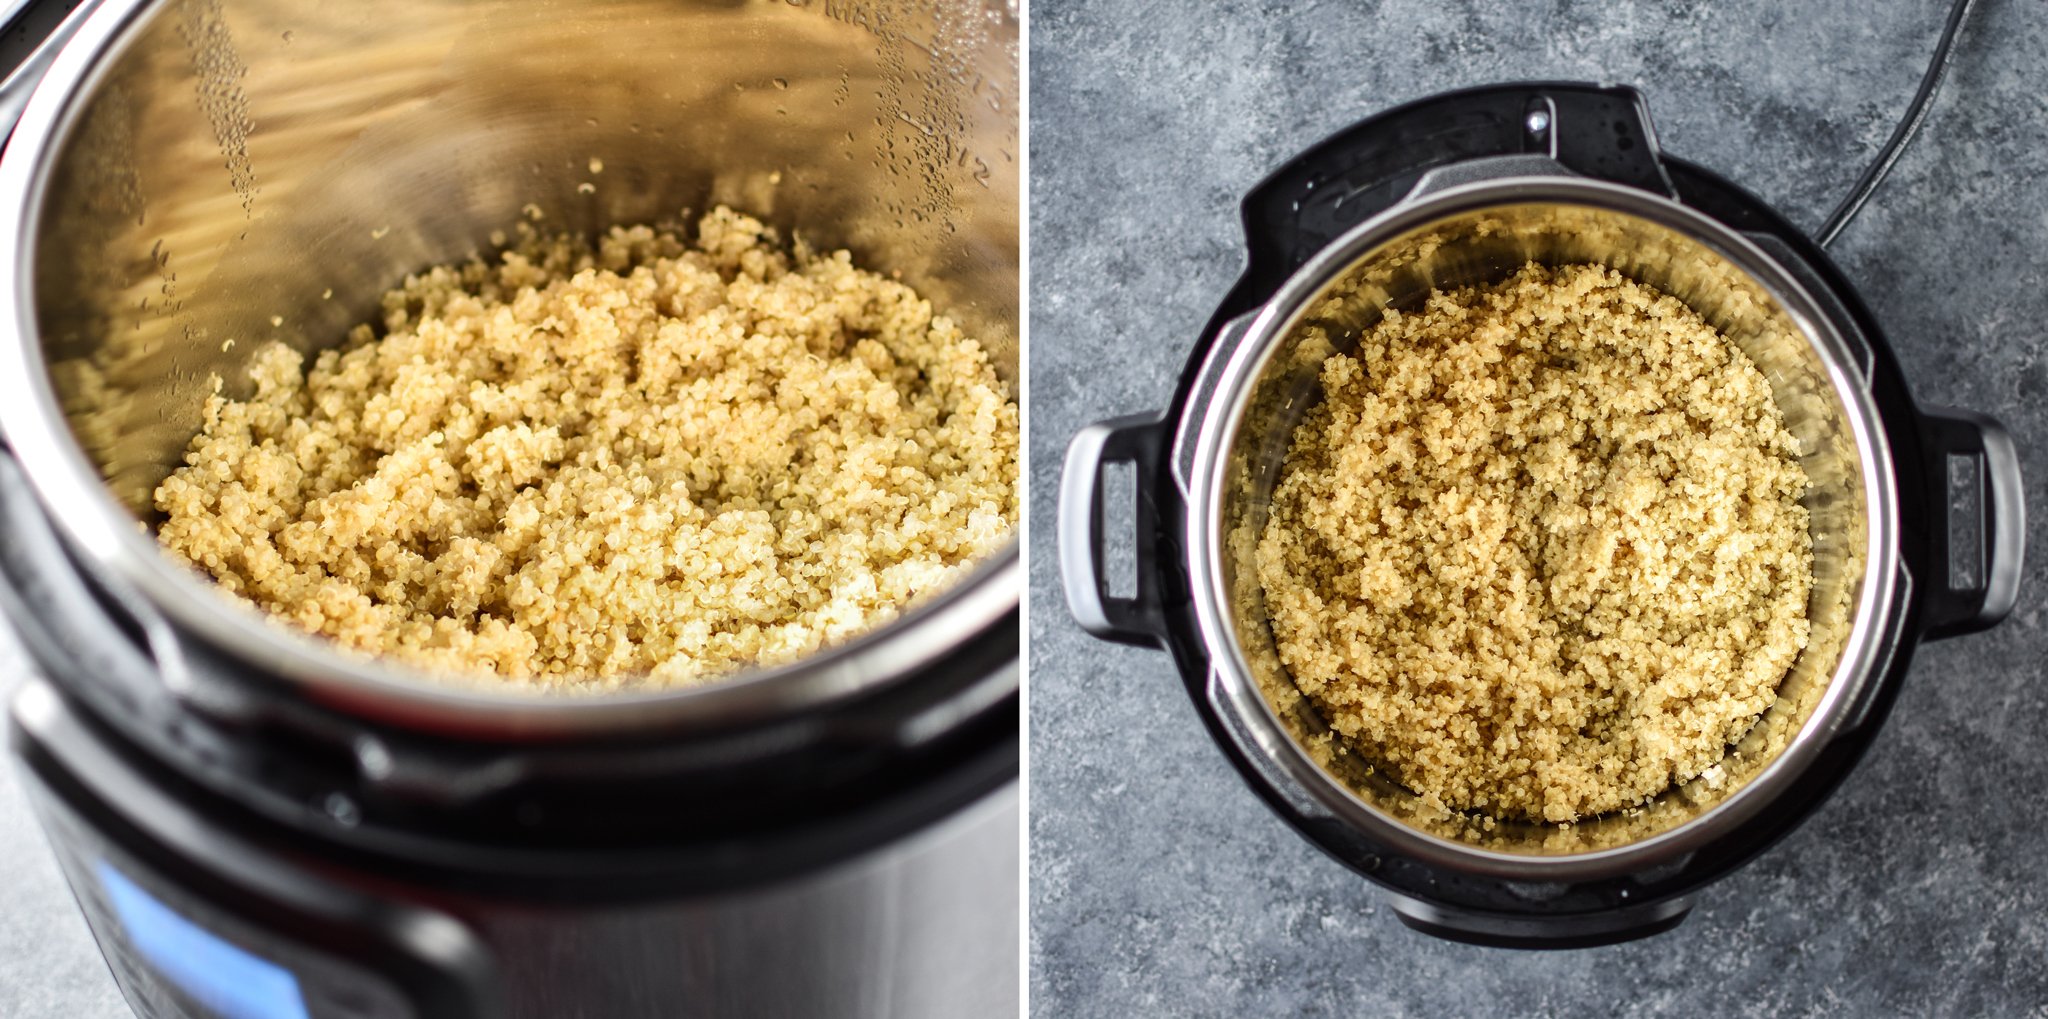 Cooking quinoa in the Instant Pot.